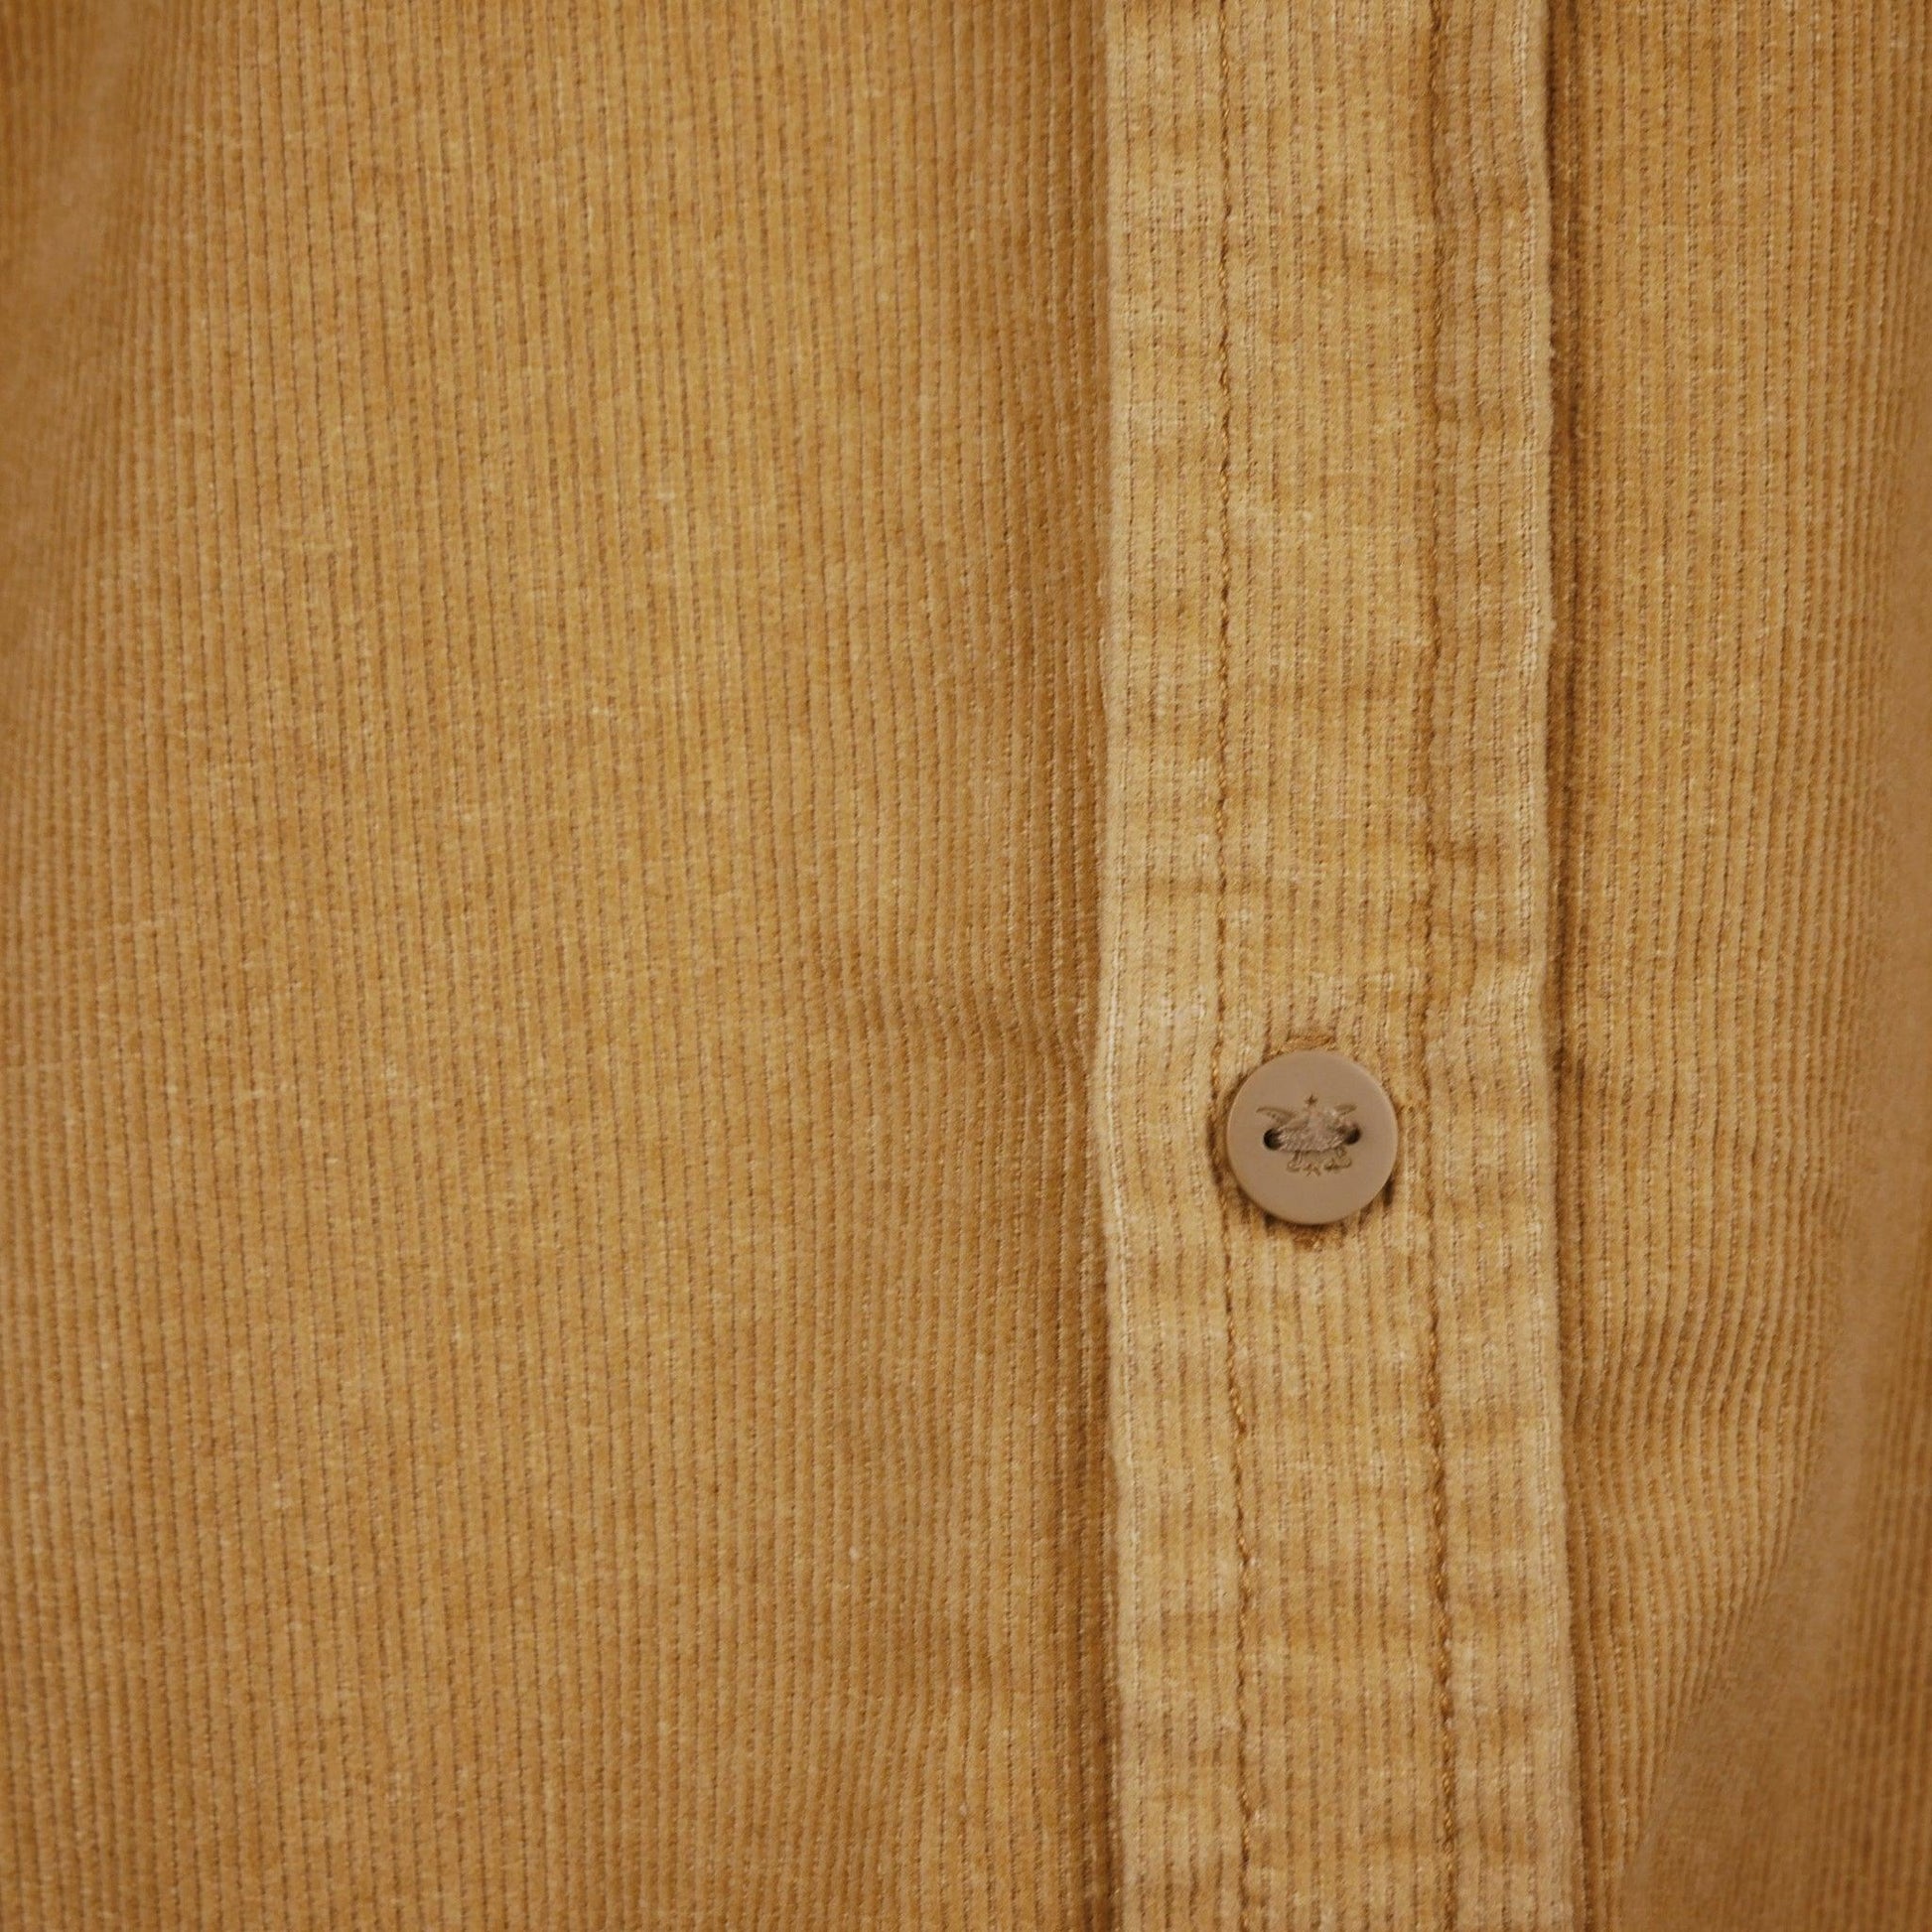 Close up of button on shirt. Buttons feature image of A&Eagle